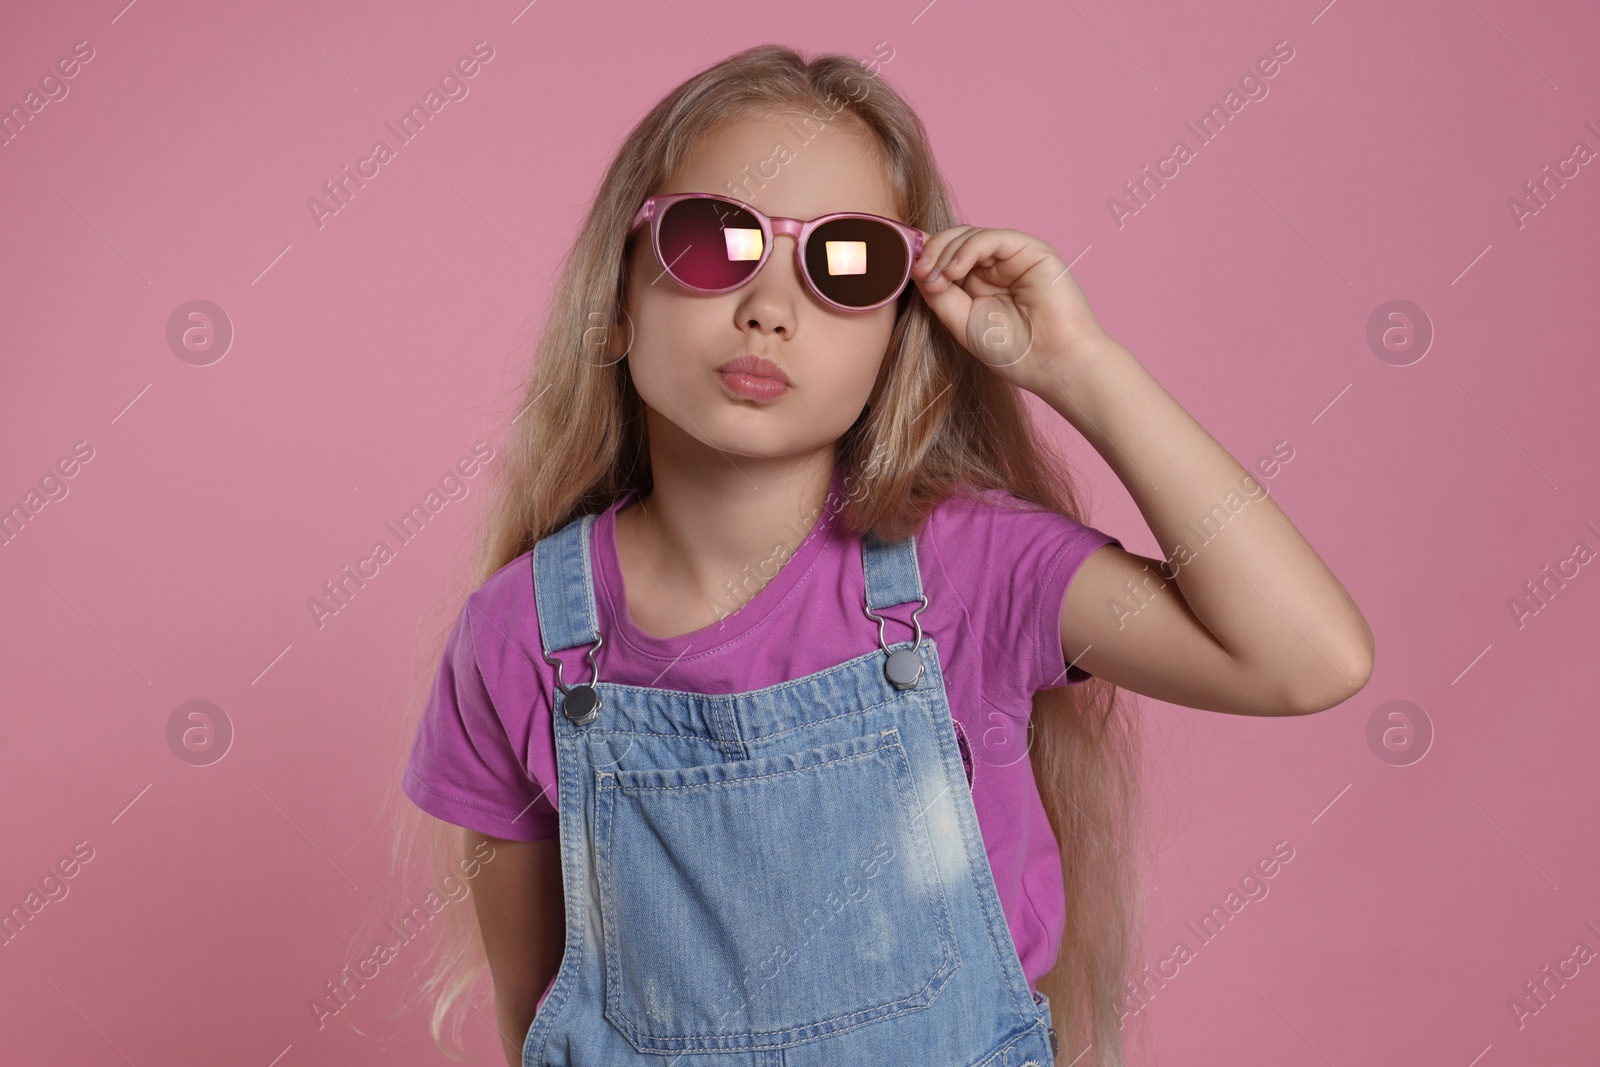 Photo of Girl in stylish sunglasses on pink background